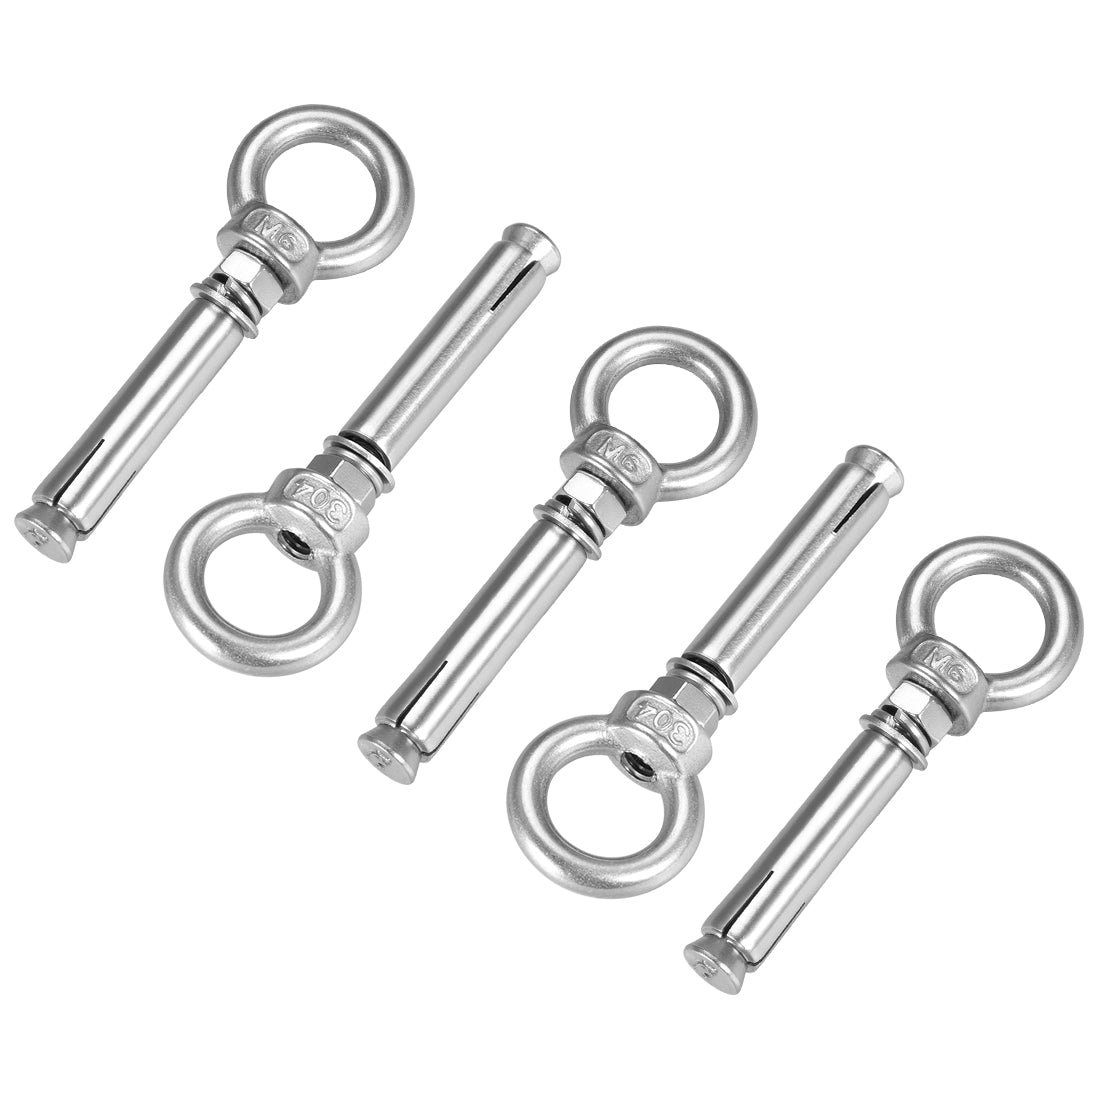 uxcell Uxcell M6 x 60 Expansion Eyebolt Eye Nut Screw with Ring Anchor Raw Bolts 5 Pcs